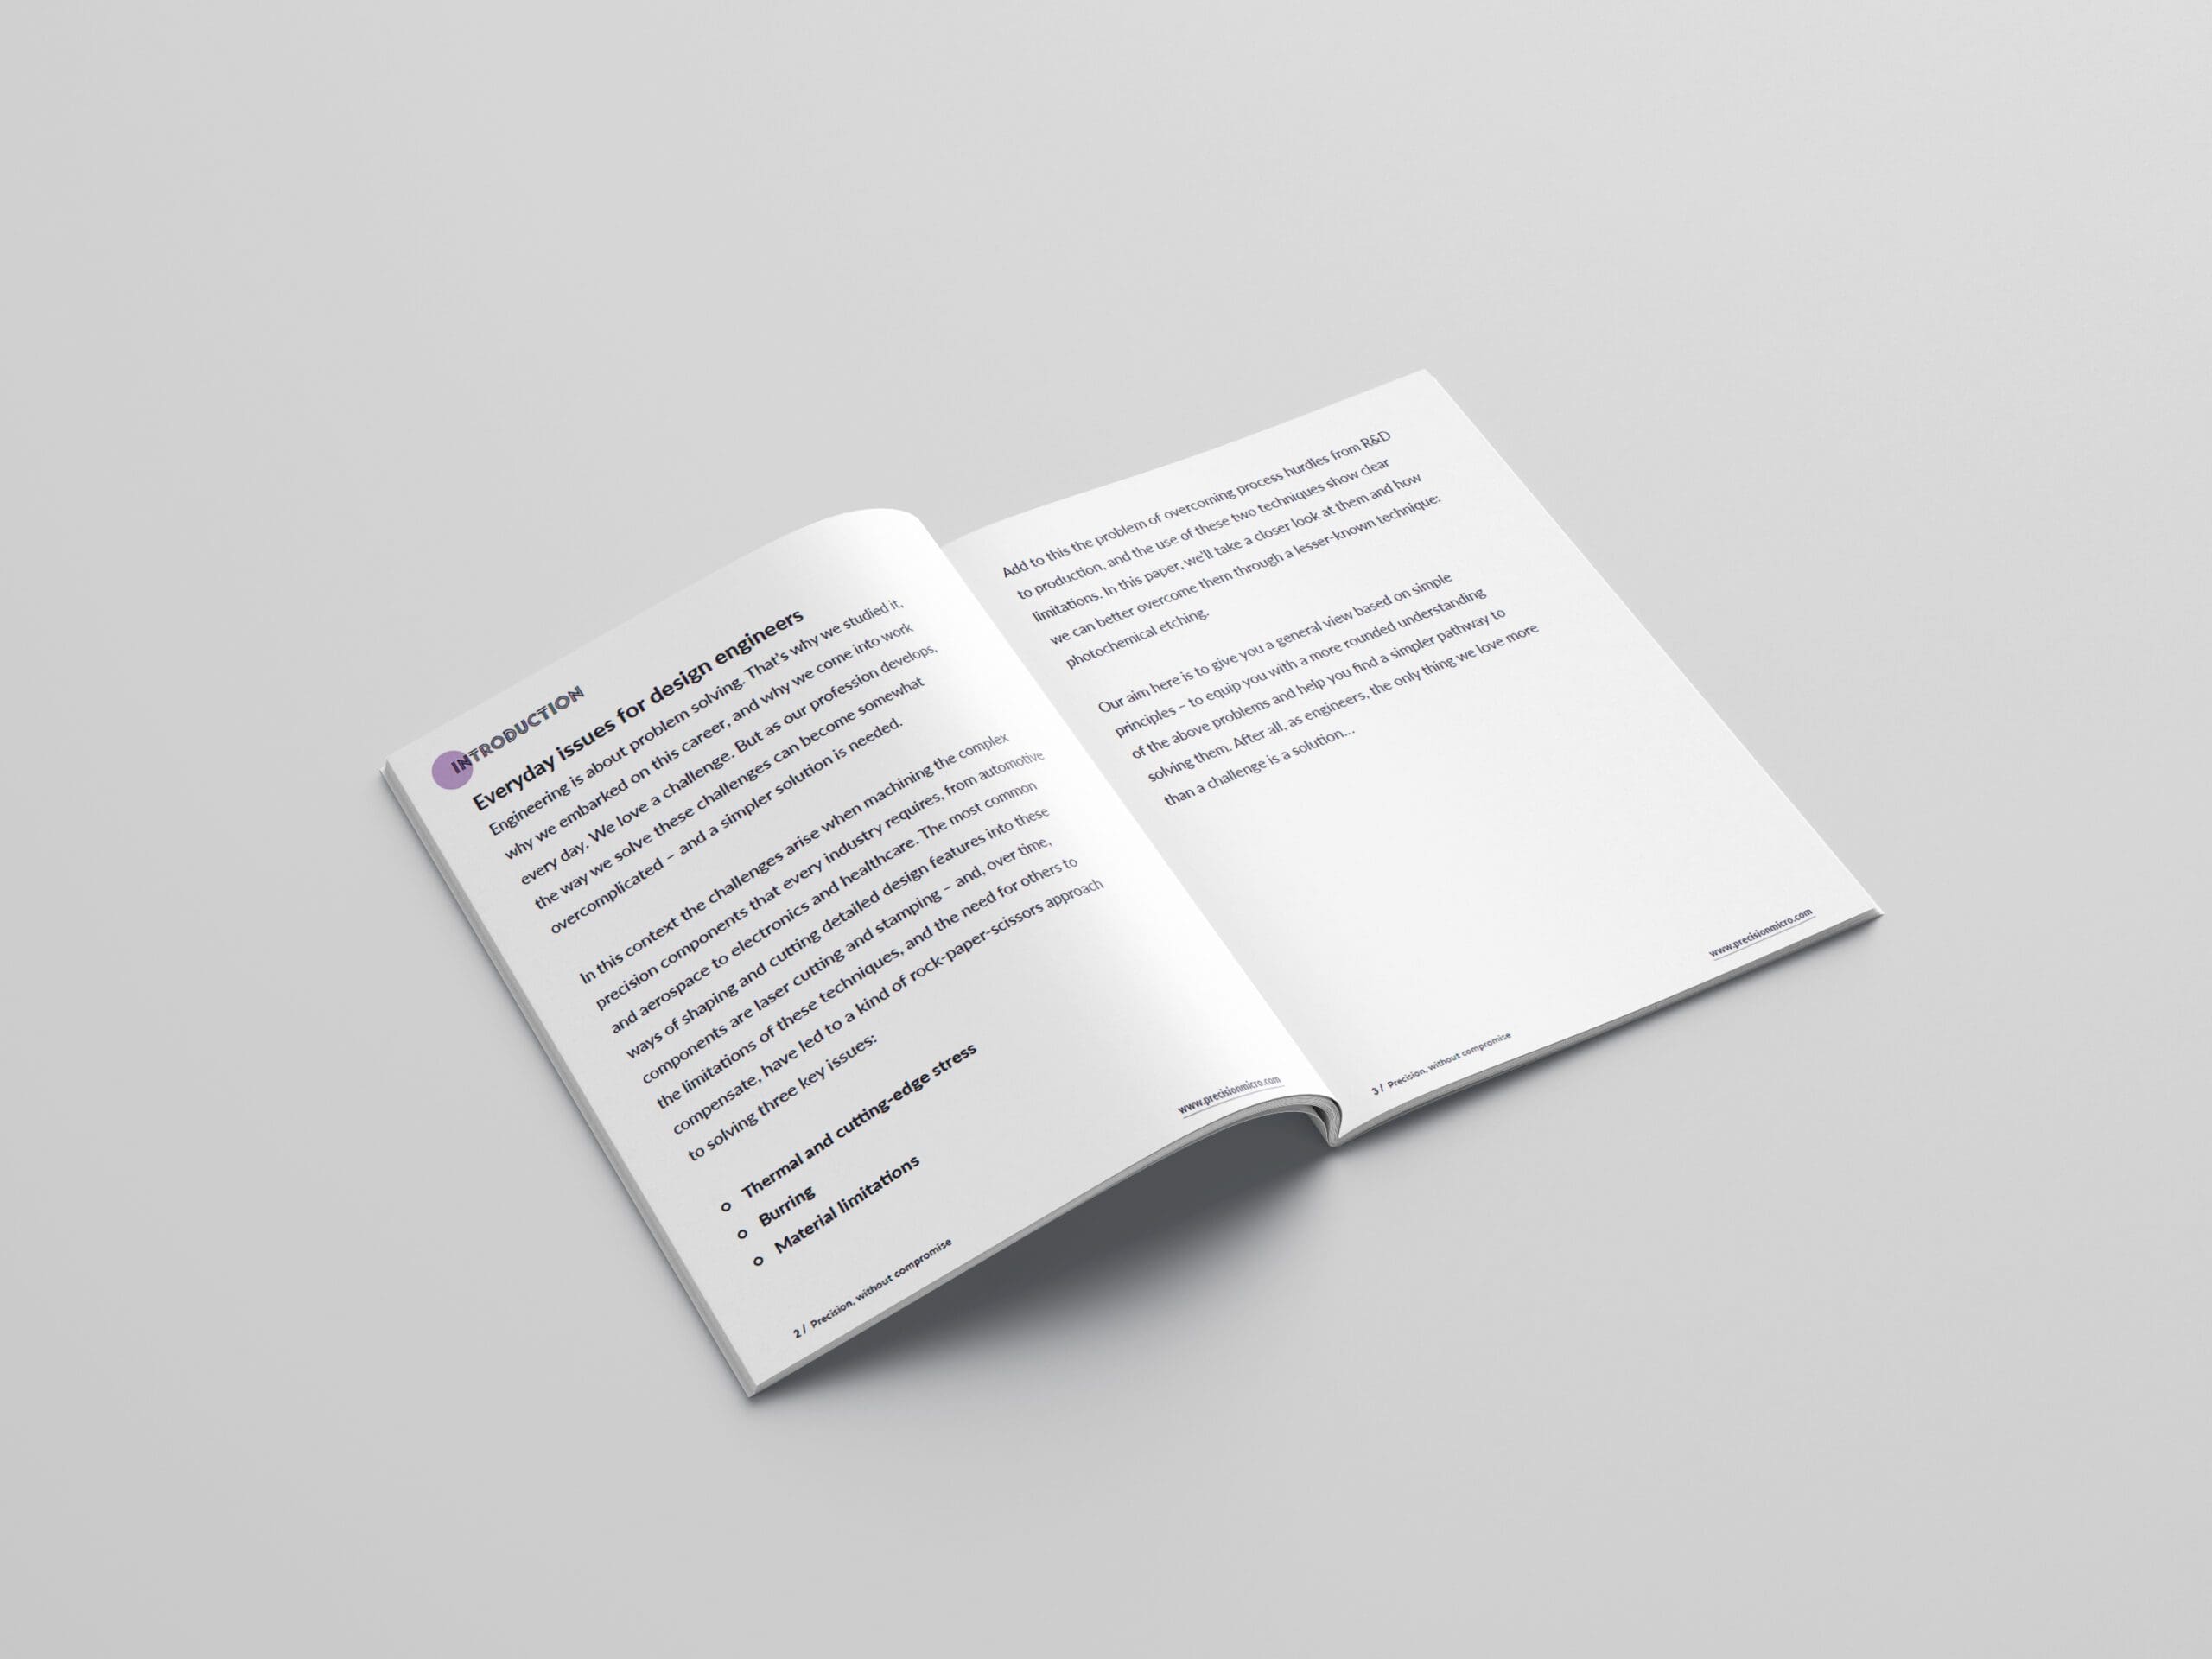 Whitepaper inside pages